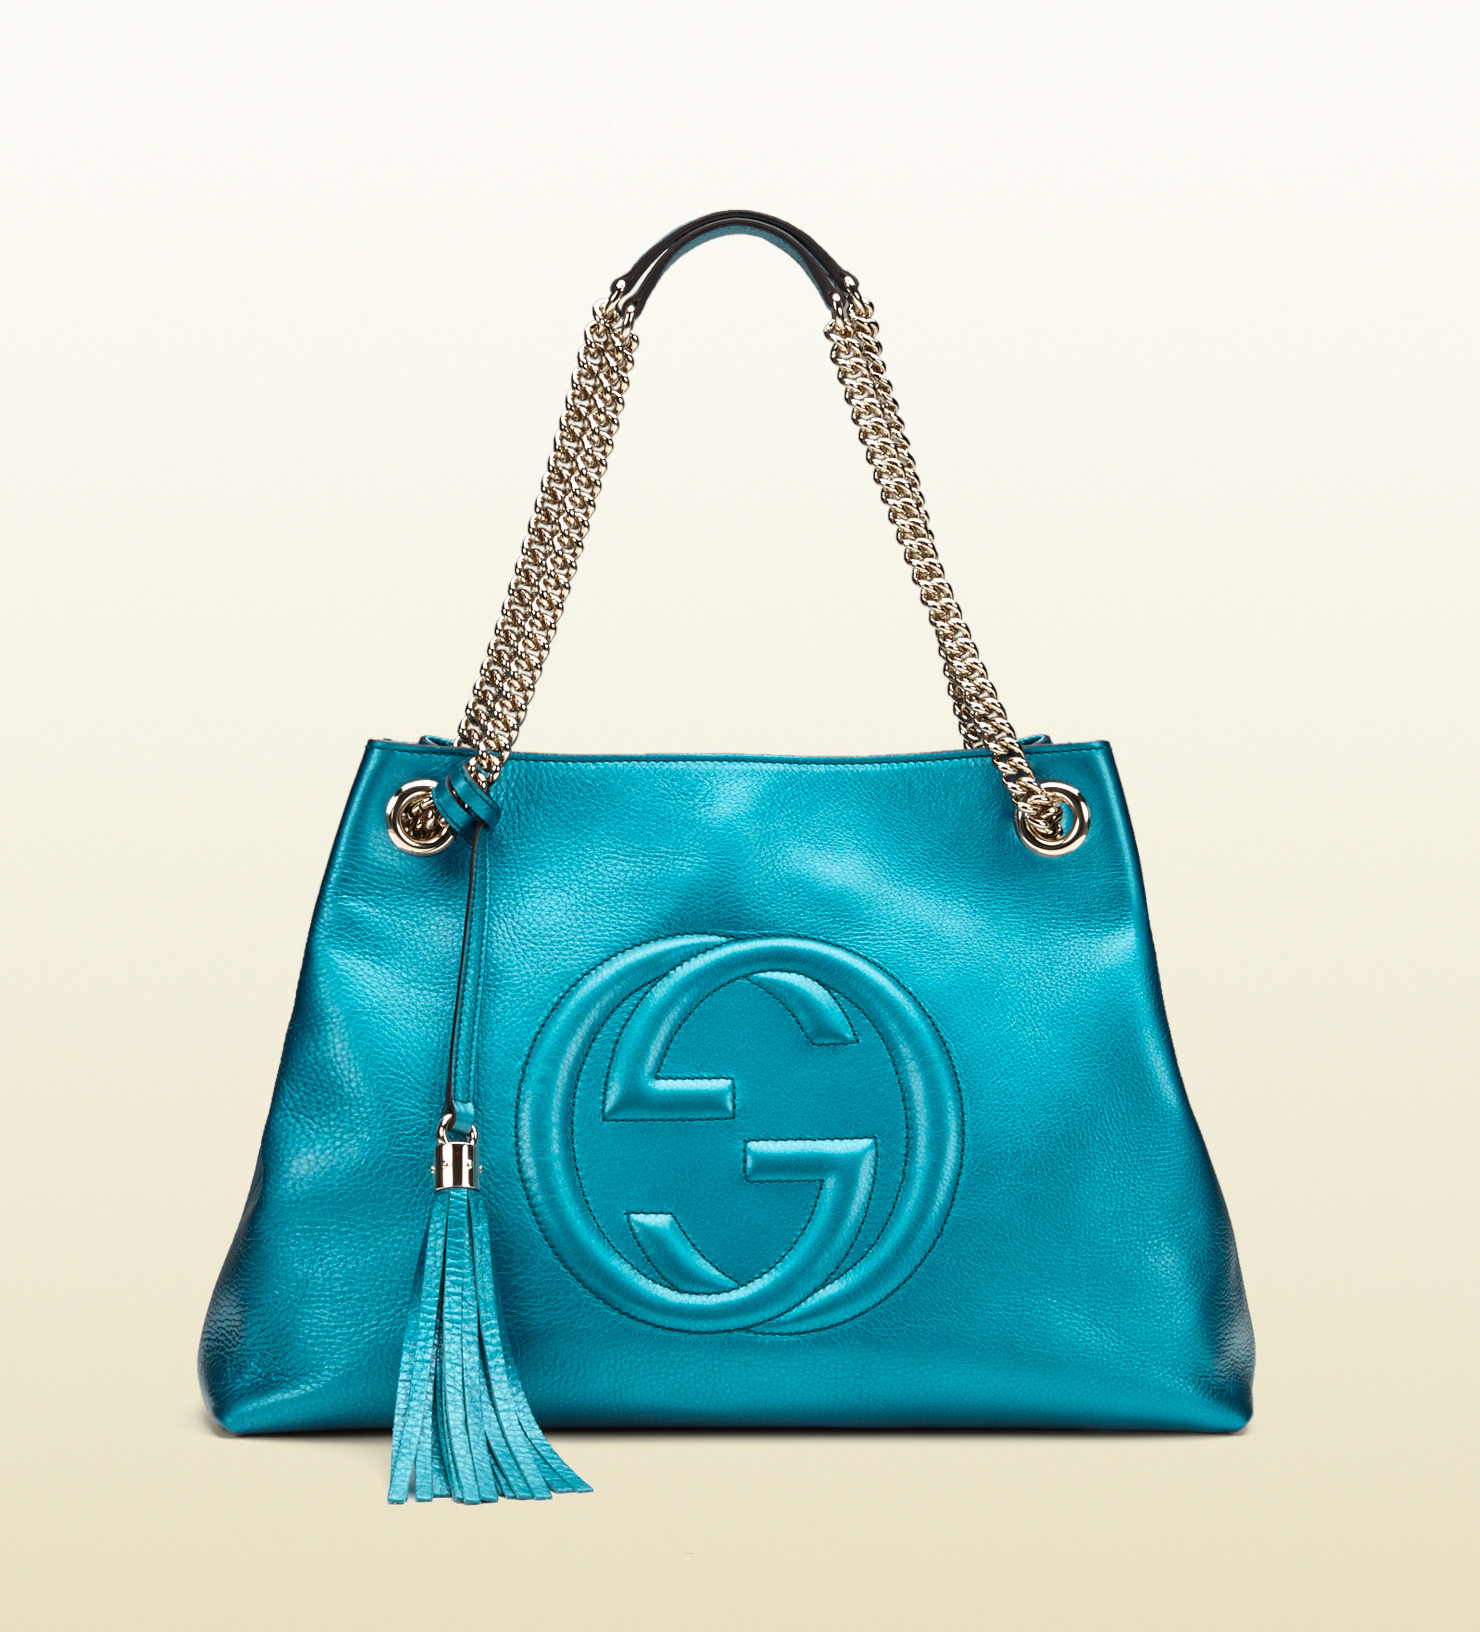 Gucci Online Exclusive Soho Metallic Leather Shoulder Bag in Blue | Lyst